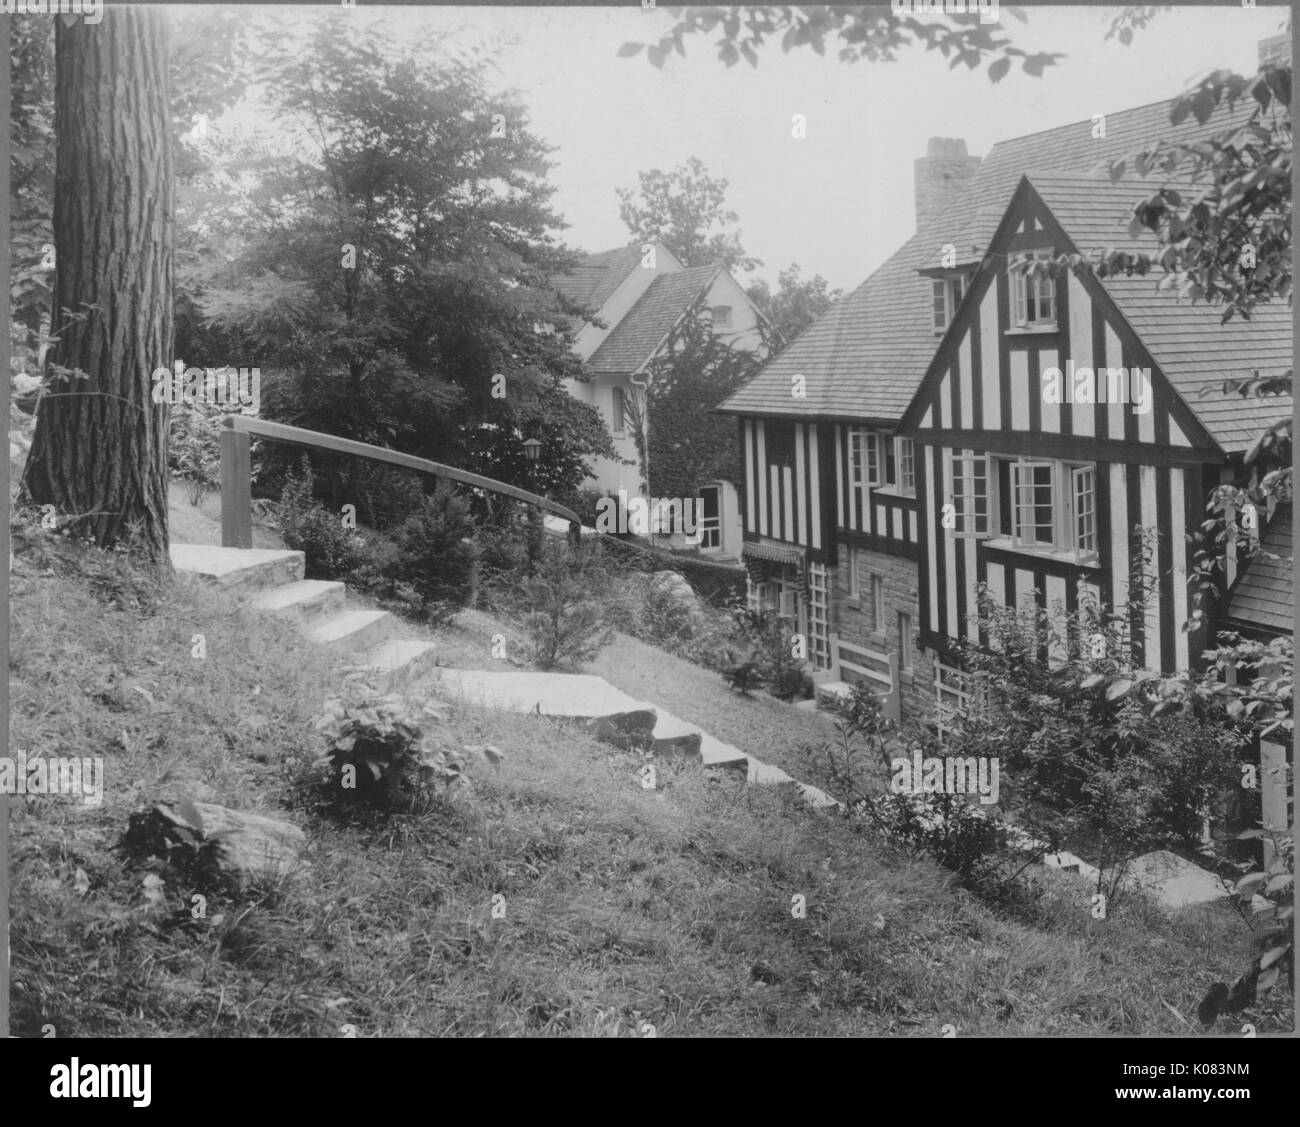 Partial view of a half-timbered and stone home with a chimney, a dormer window, standard windows, and a long set of steps with a railing leading to its entrance, set among trees and shrubbery, next to another home, partially-visible, in Baltimore, Maryland, 1910. This image is from a series documenting the construction and sale of homes in the Roland Park/Guilford neighborhood of Baltimore, a streetcar suburb and one of the first planned communities in the United States. Stock Photo